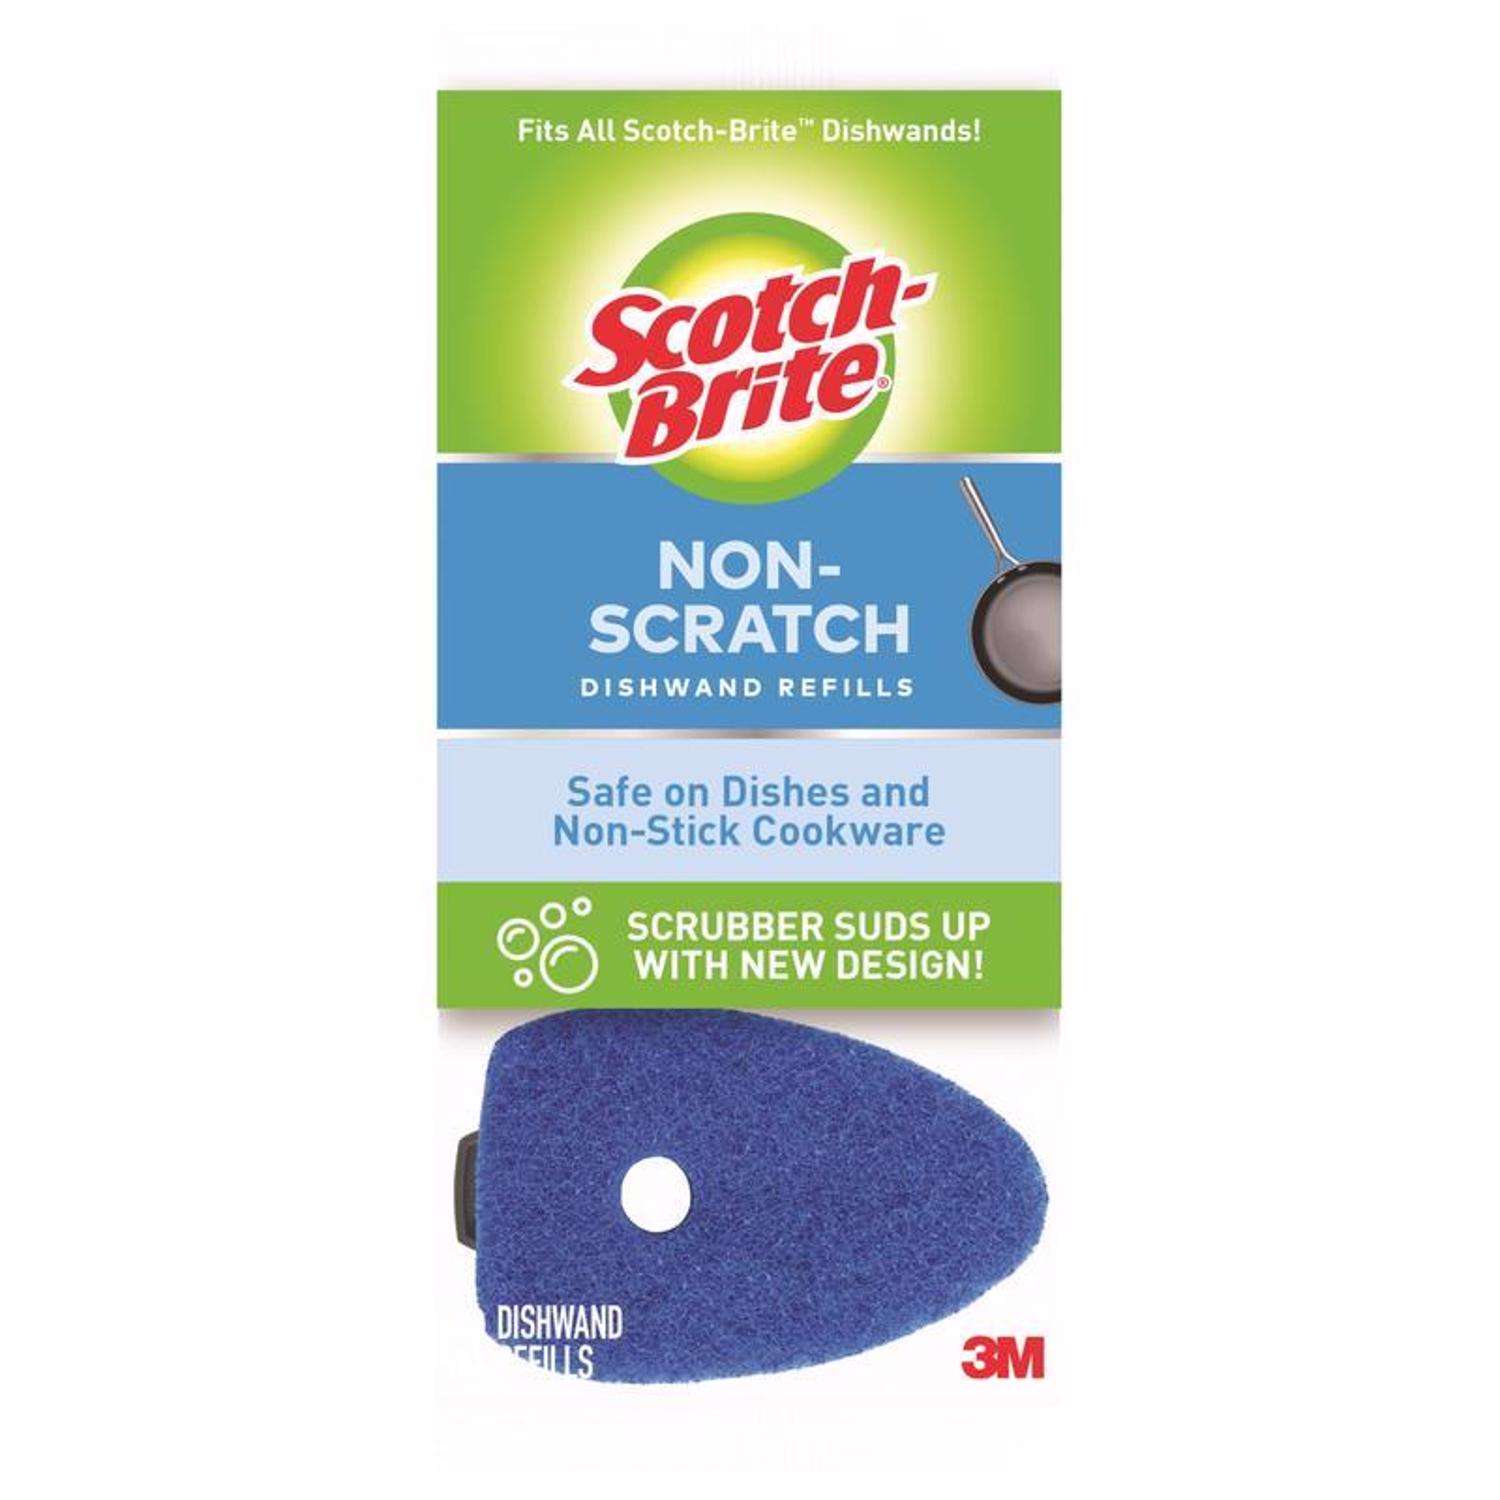 Scotch-Brite Dishwand, Brush Scrubber for Cleaning Dishes, Kitchen,  Bathroom, and Household, Dish Scrubber Brush for Dishes, 1 Dishwand